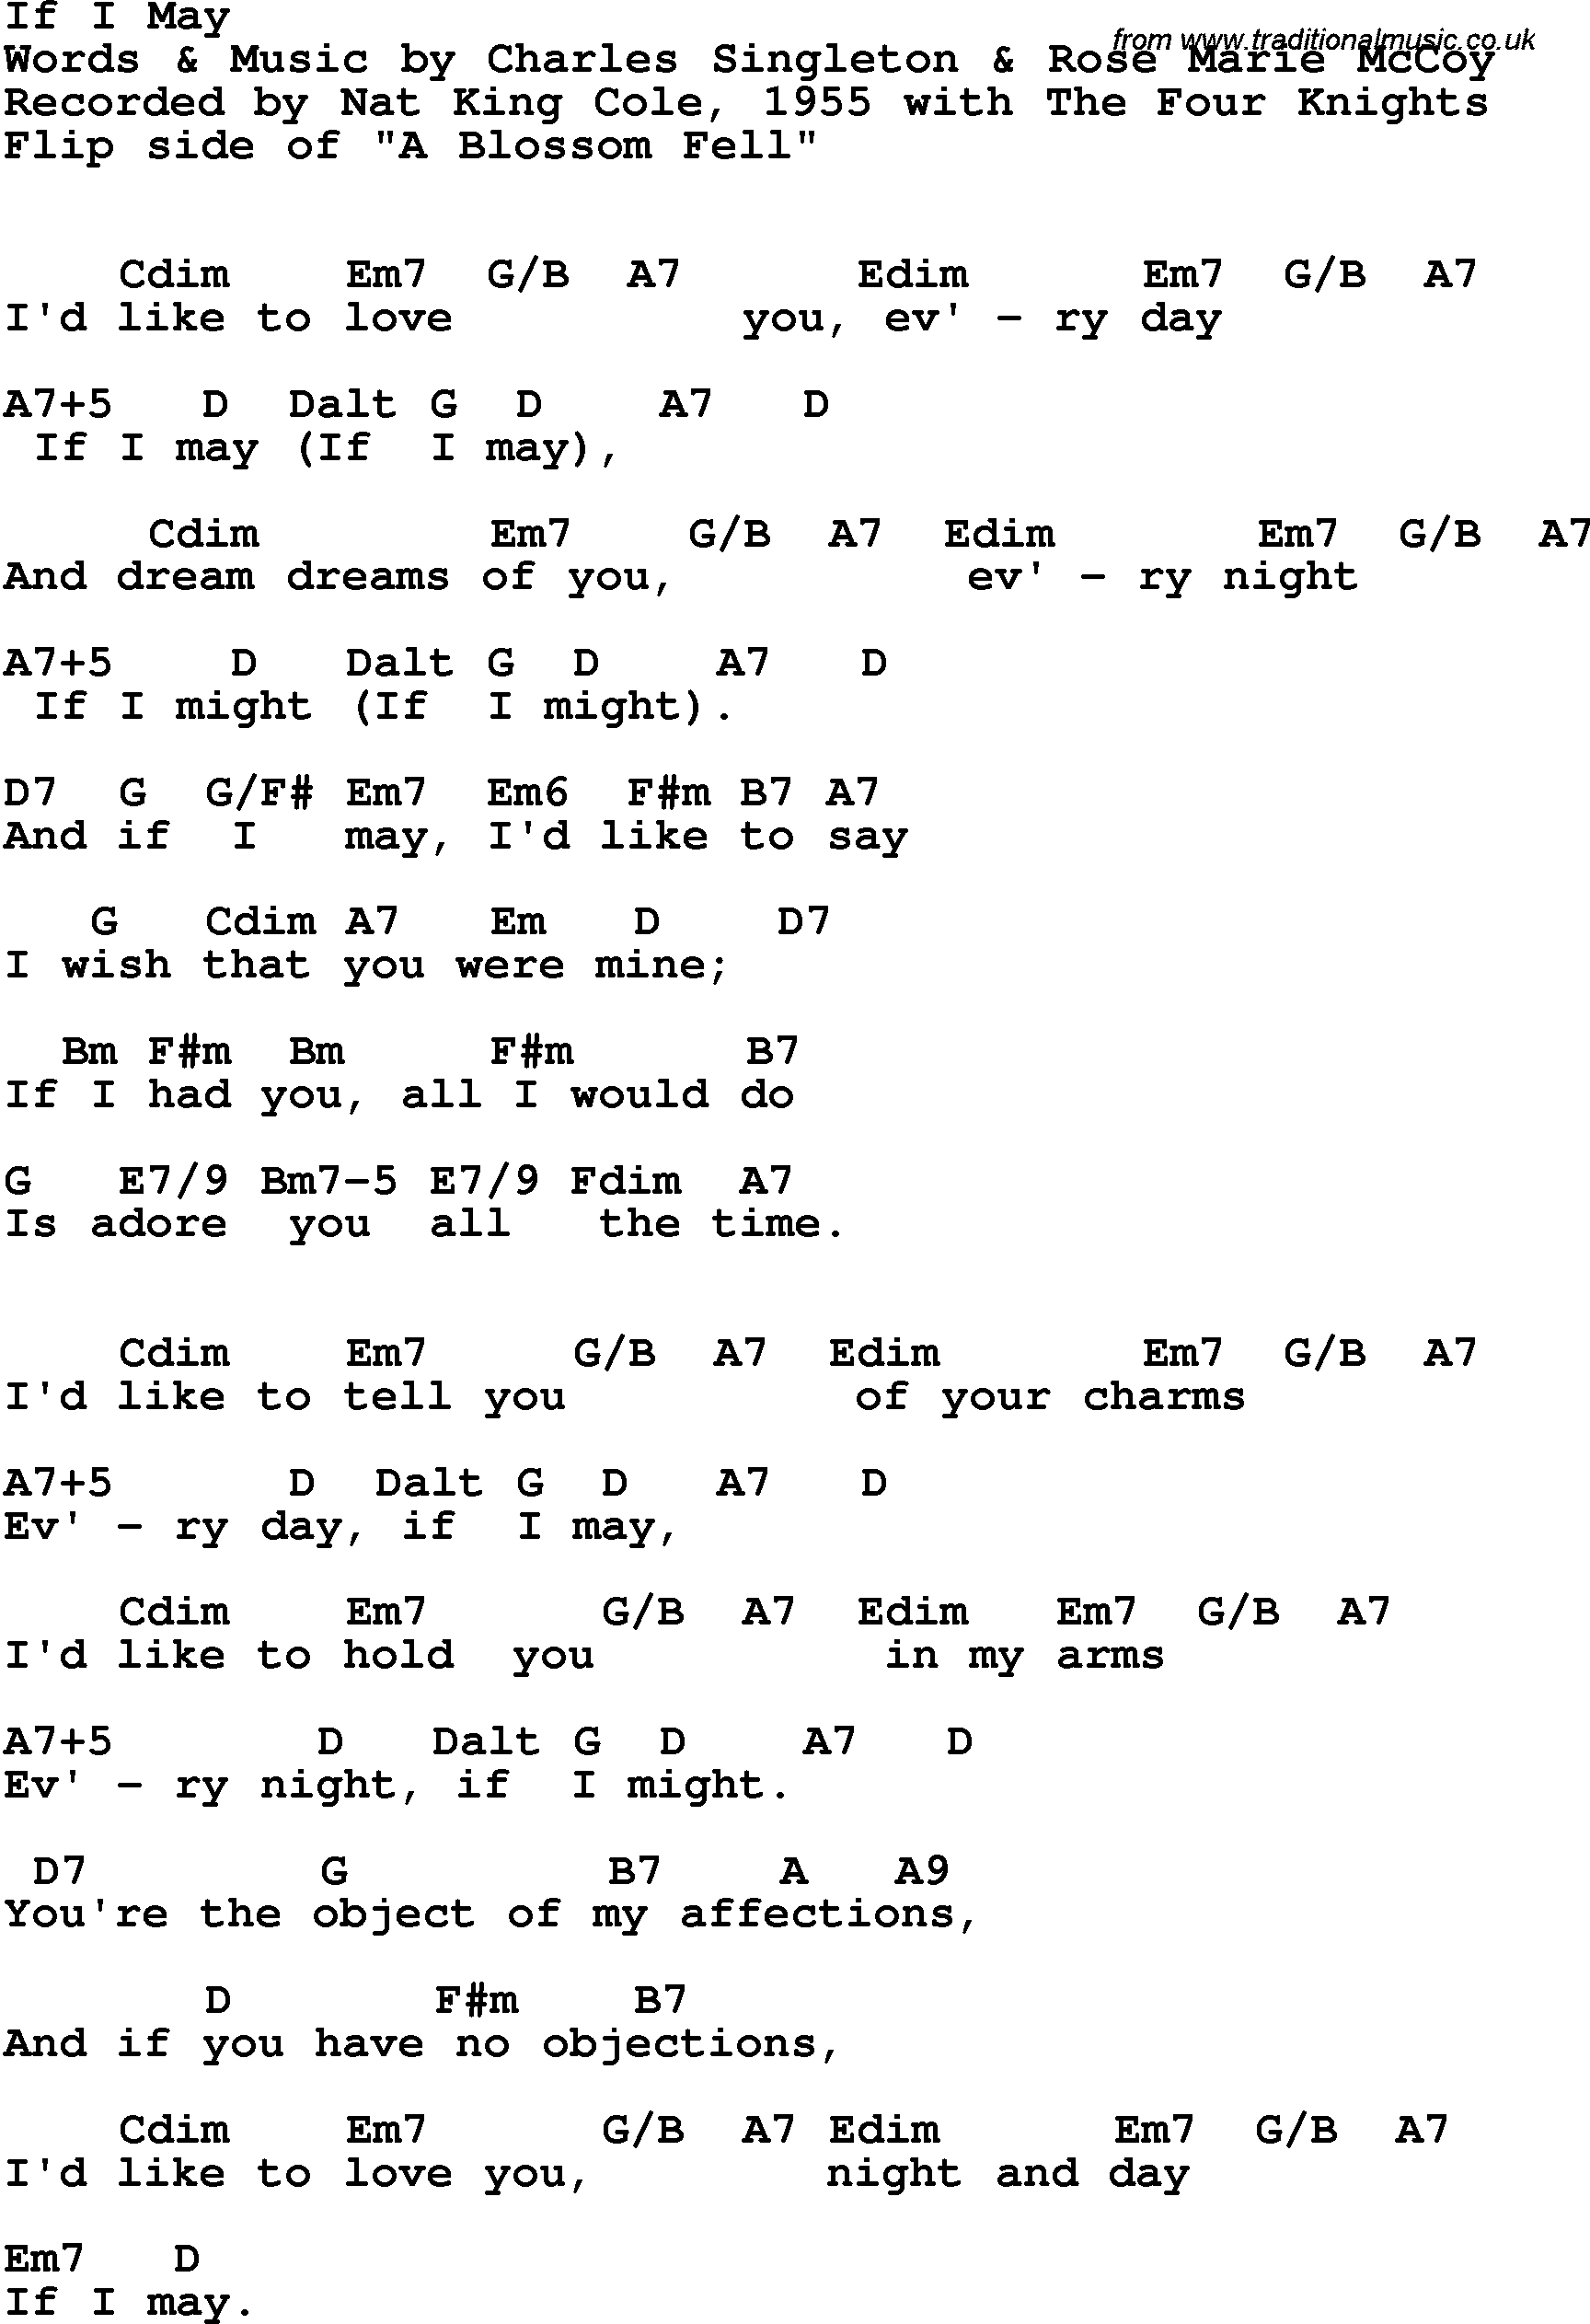 Song Lyrics with guitar chords for If I May - Nat King Cole & The Four Knights, 1955